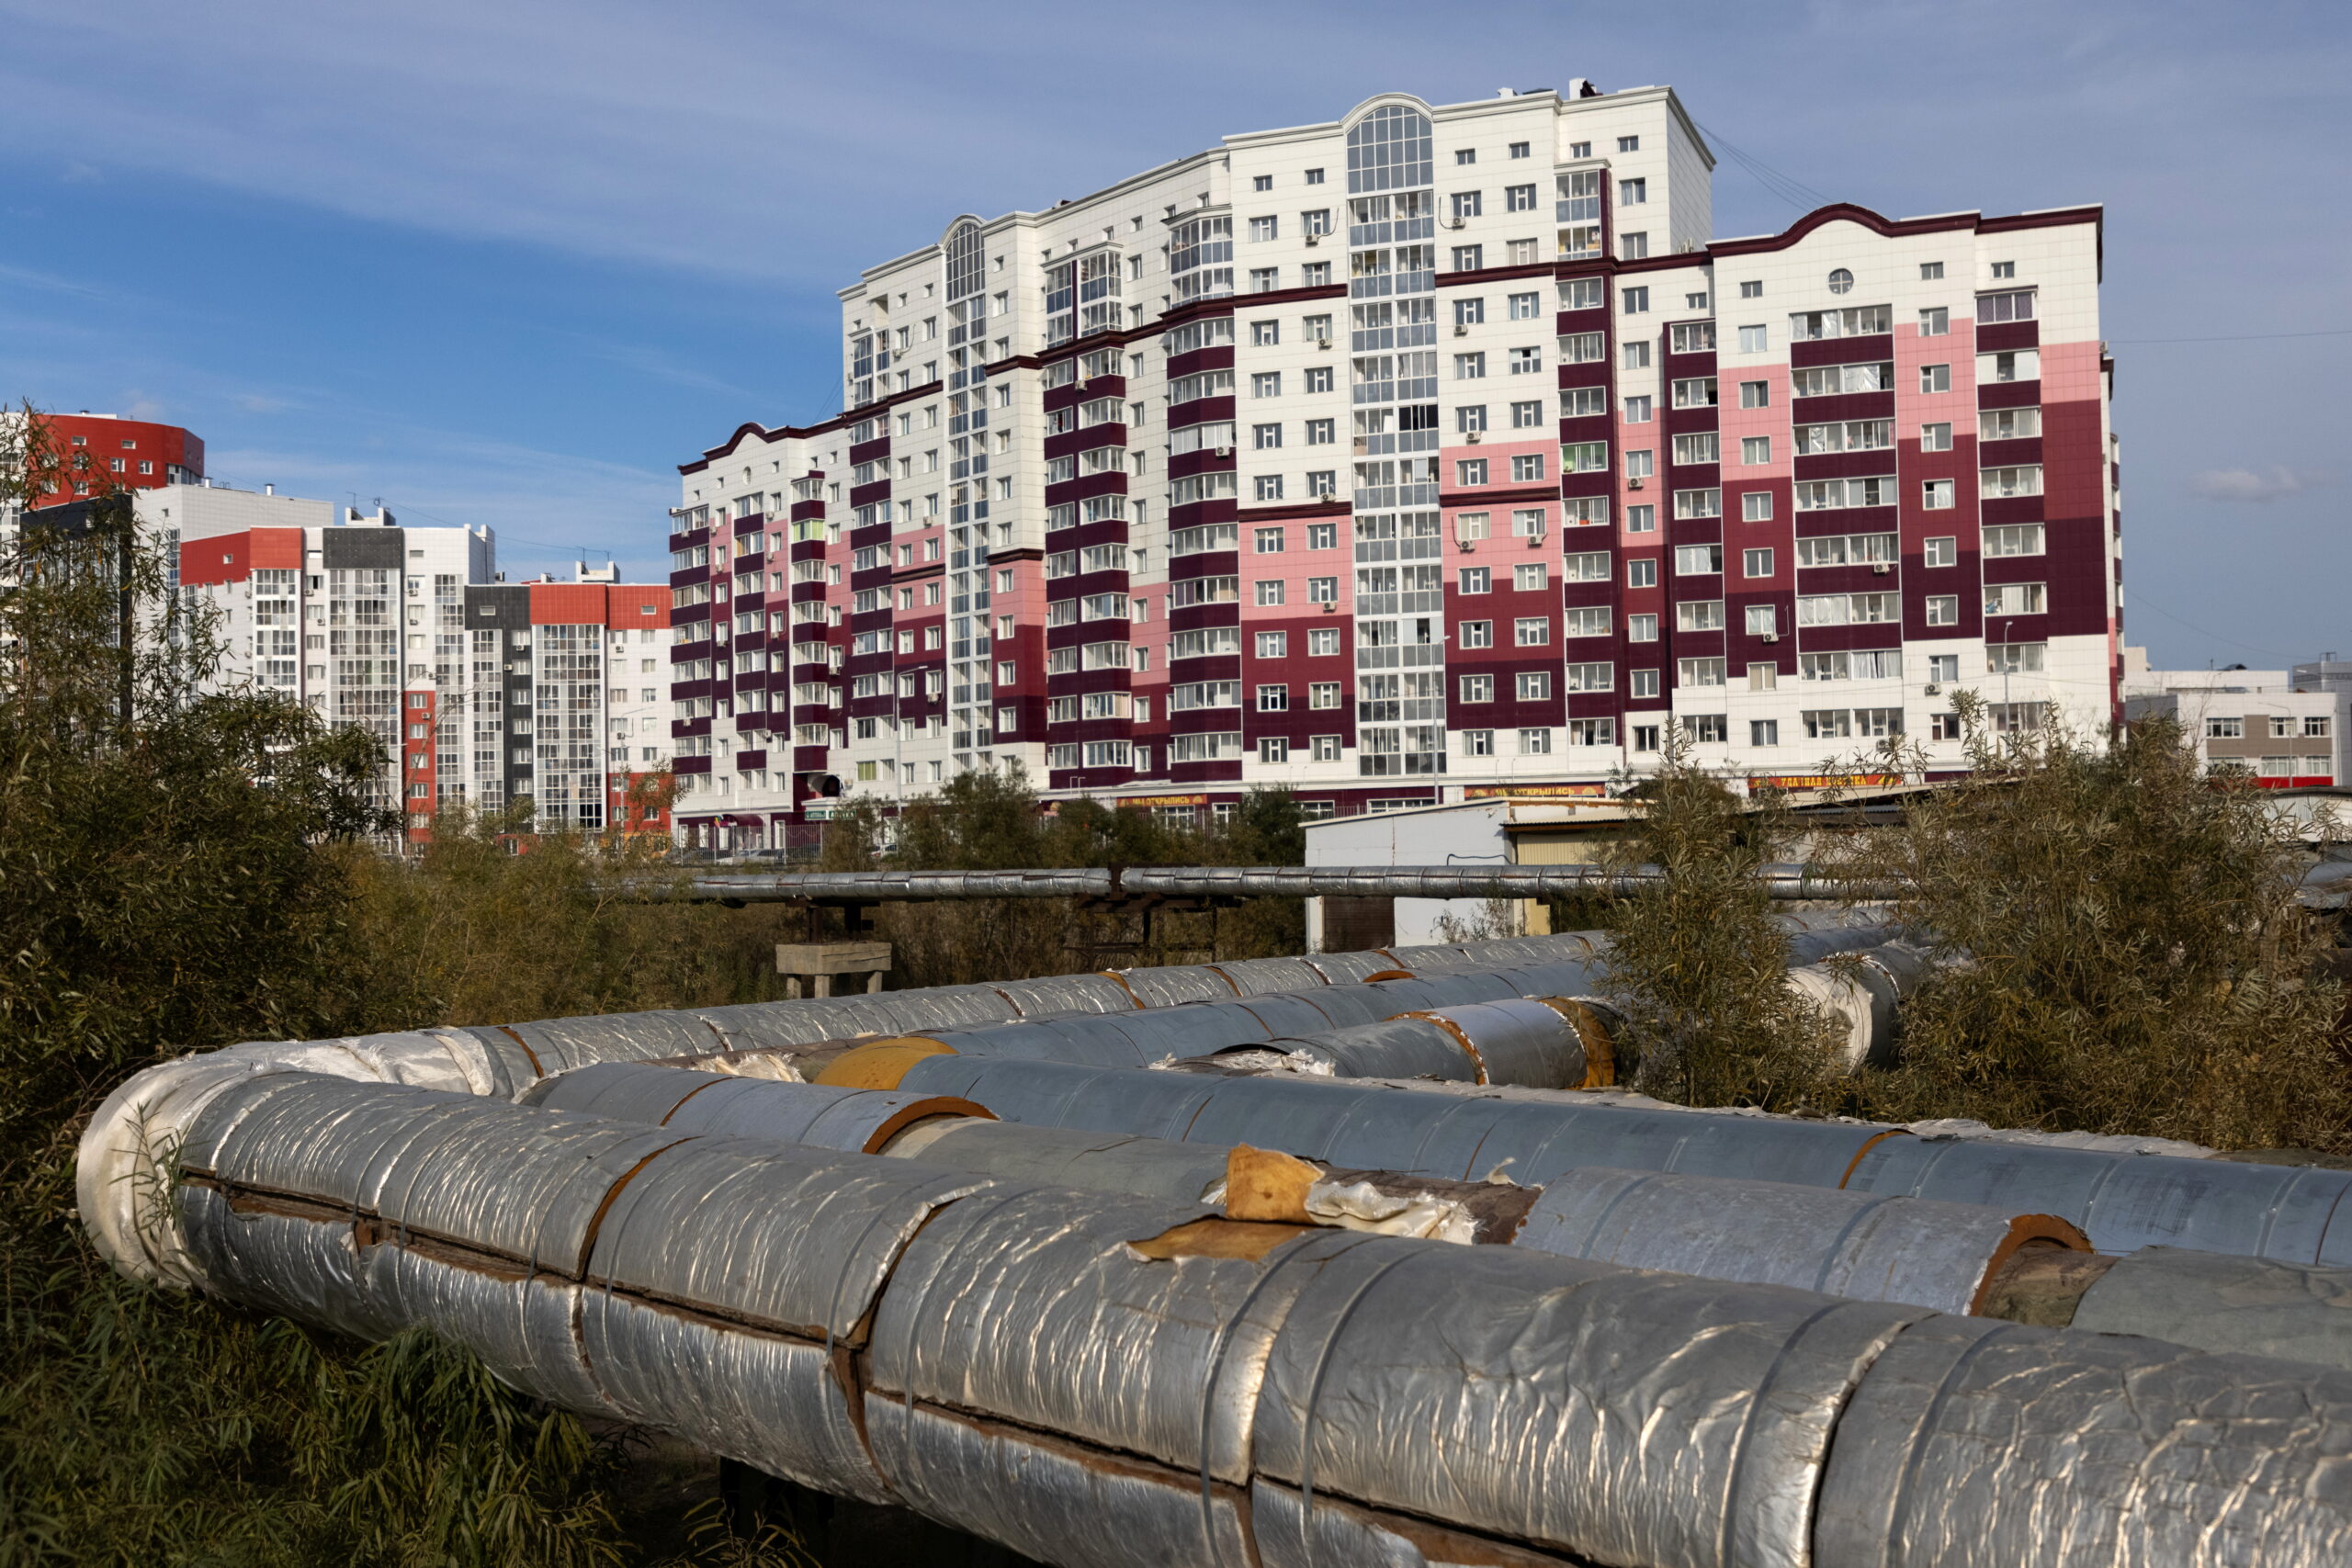 a general view of pipelines laid above the ground in the town of yakutsk